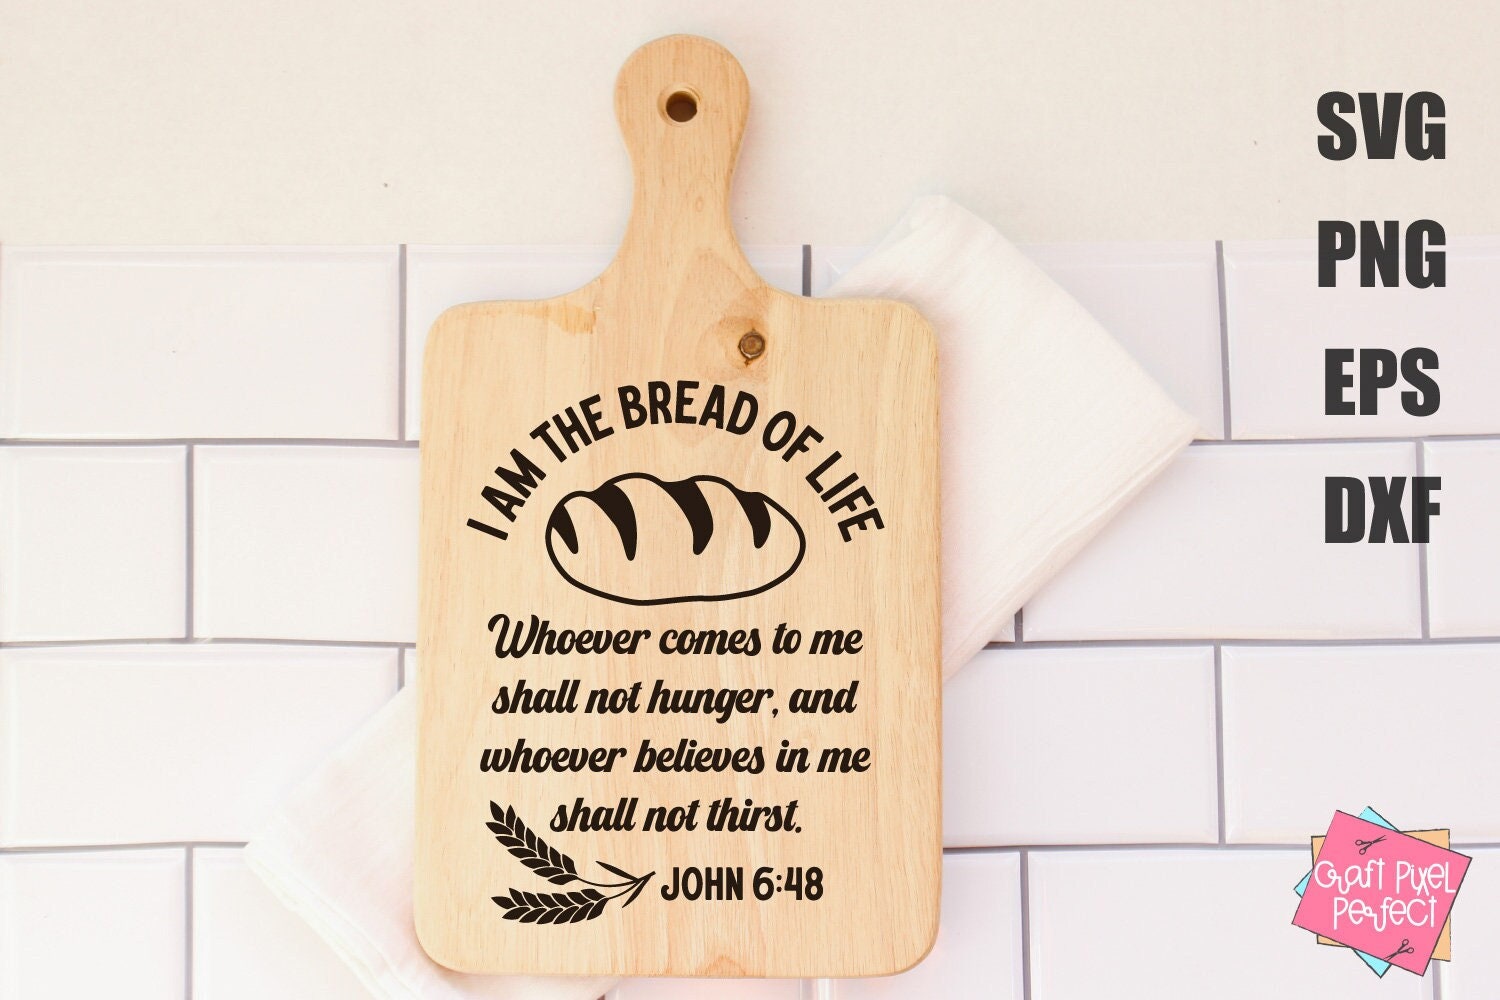 I am the Bread of Life Cutting Board with Bible Verse - Forest Decor